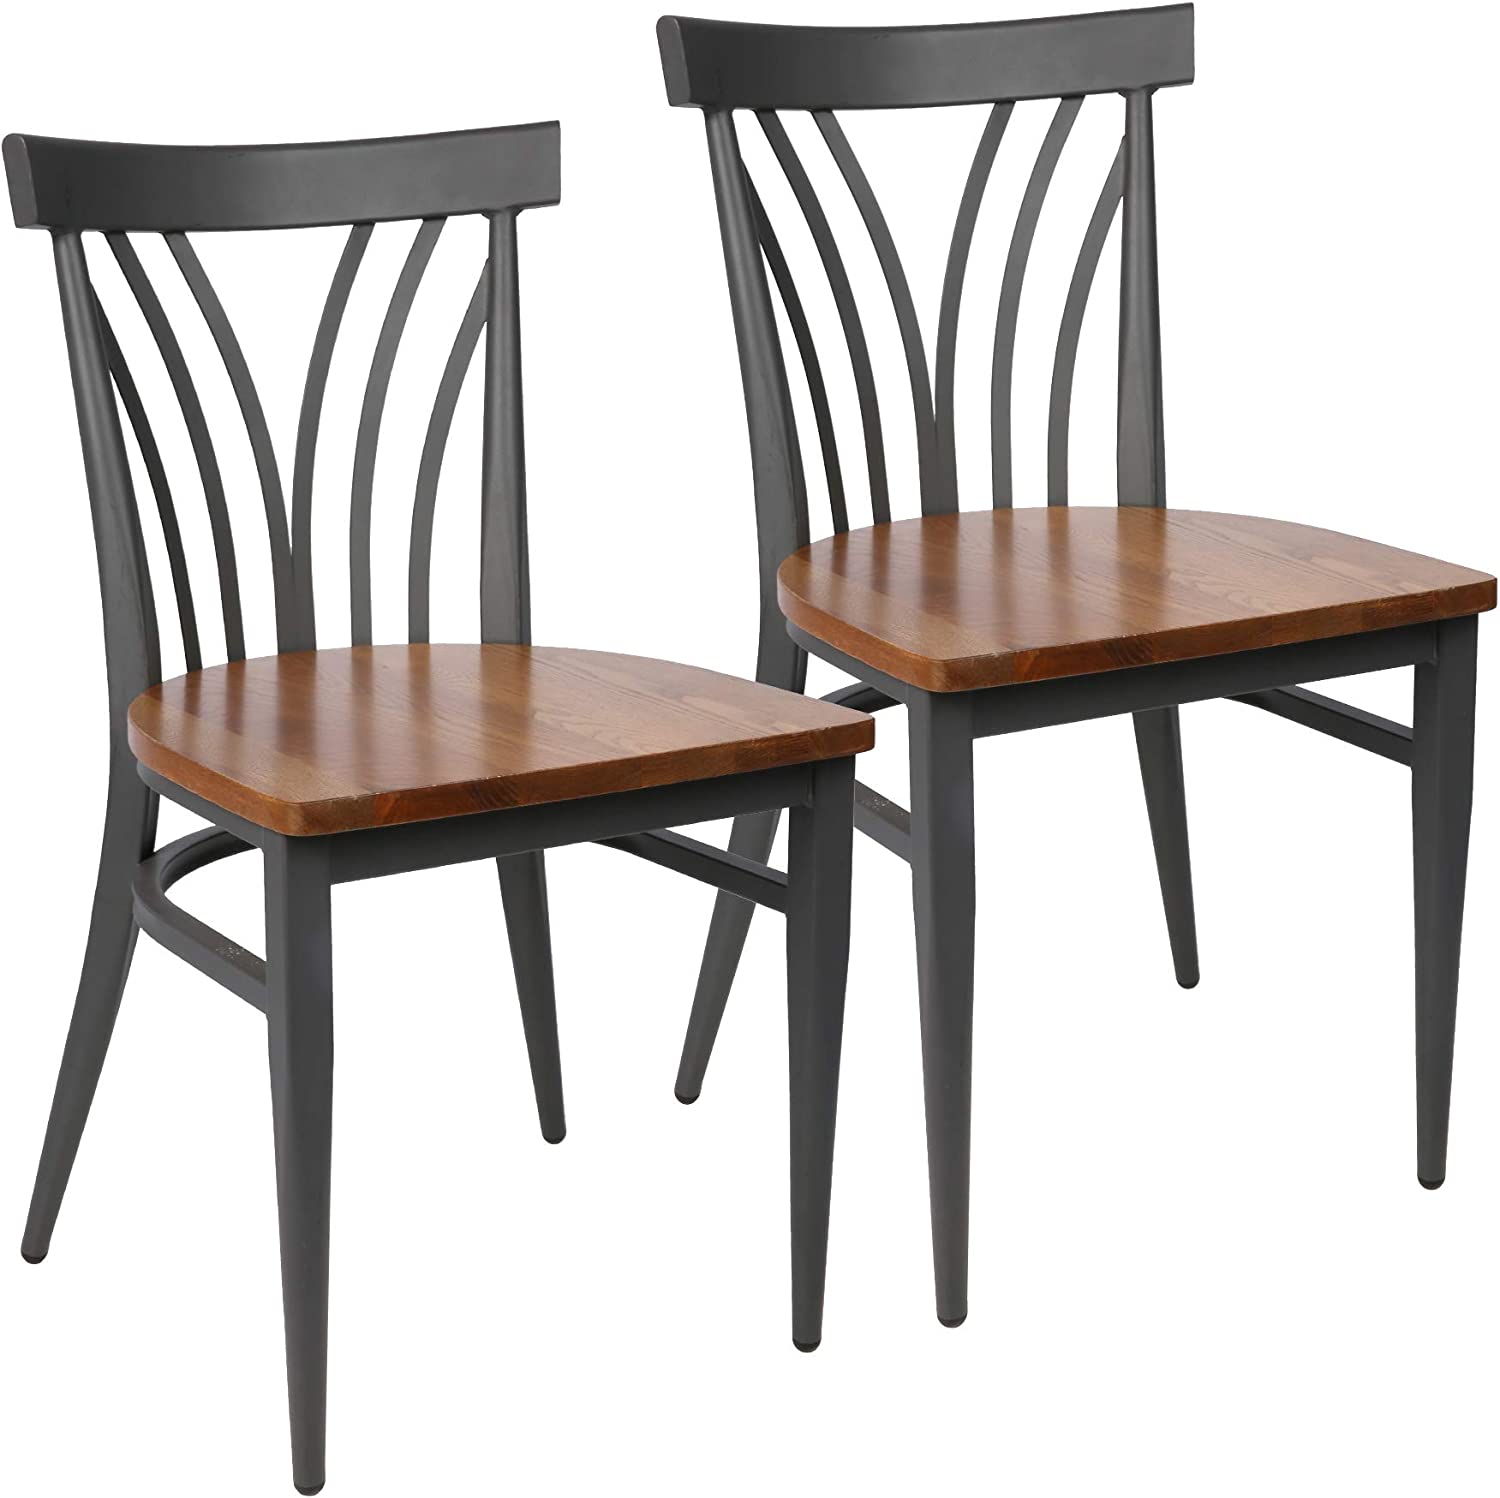 Set of 2 Modern Industrial Kitchen Dining Chairs Wood Seat with Metal Legs